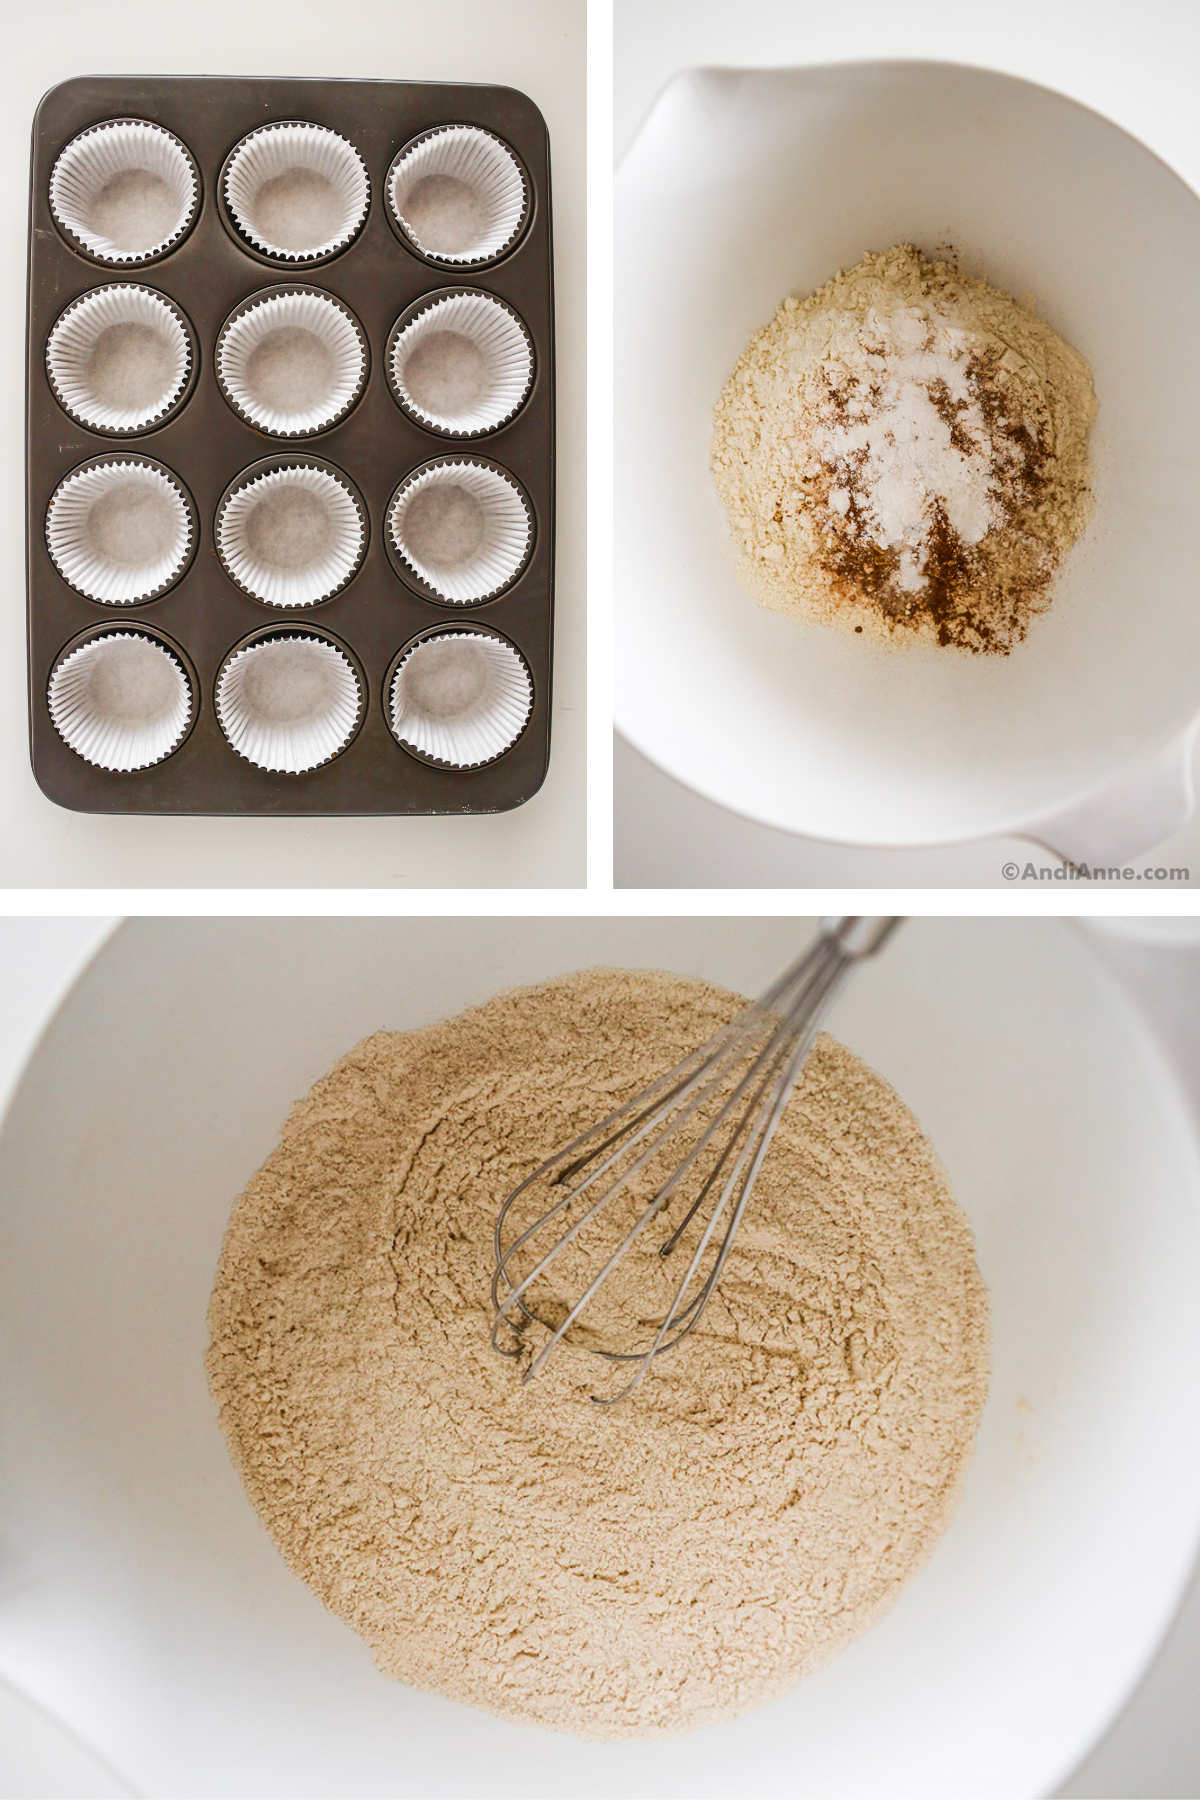 Three images in one: 1. Overhead view of muffin tray with 12 paper liners inserted. 2. Overhead view of dry ingredients added to white bowl. 3. Overhead view of dry ingredients mixed.